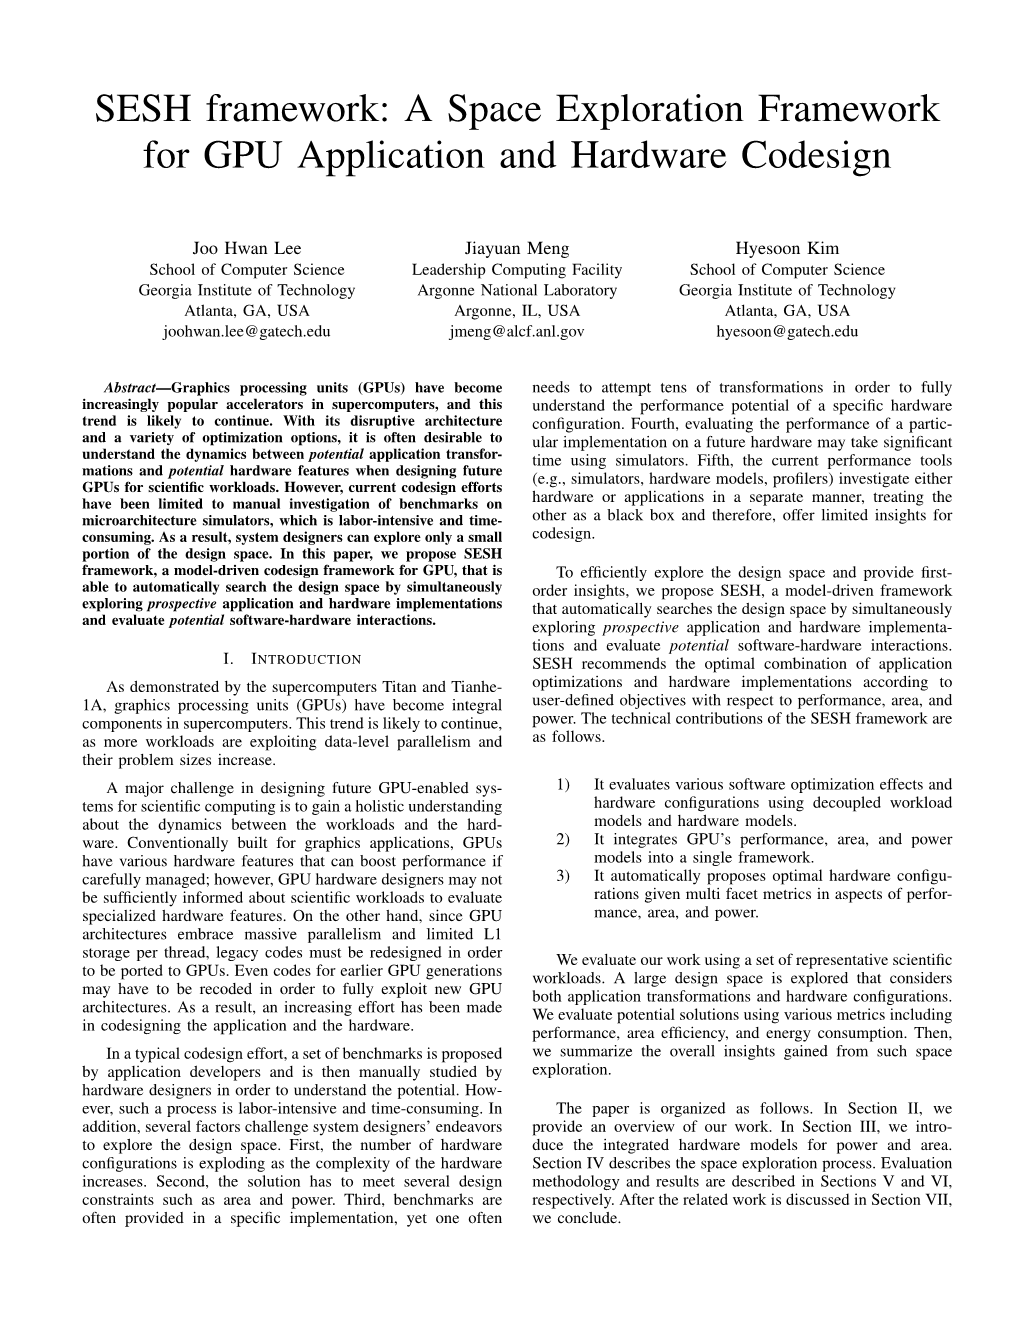 A Space Exploration Framework for GPU Application and Hardware Codesign